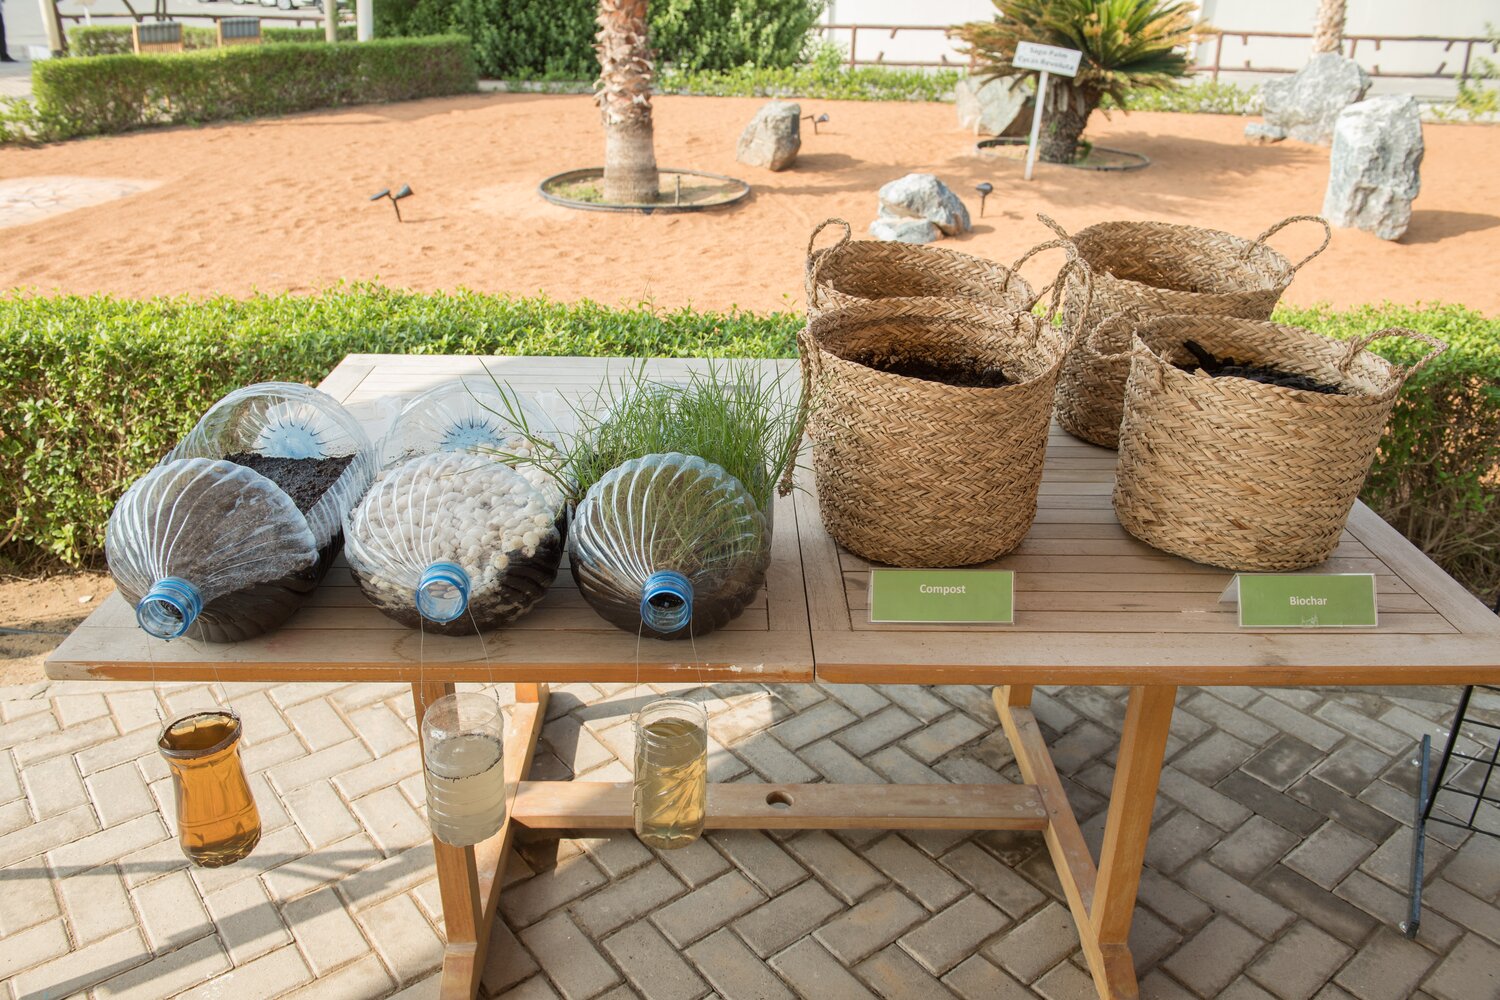 A temporary exhibit at ICBA commemorating the upcoming Year of Plant and Soil Health, showing the degree of erosion in different soil compositions. Photo credit: ICBA